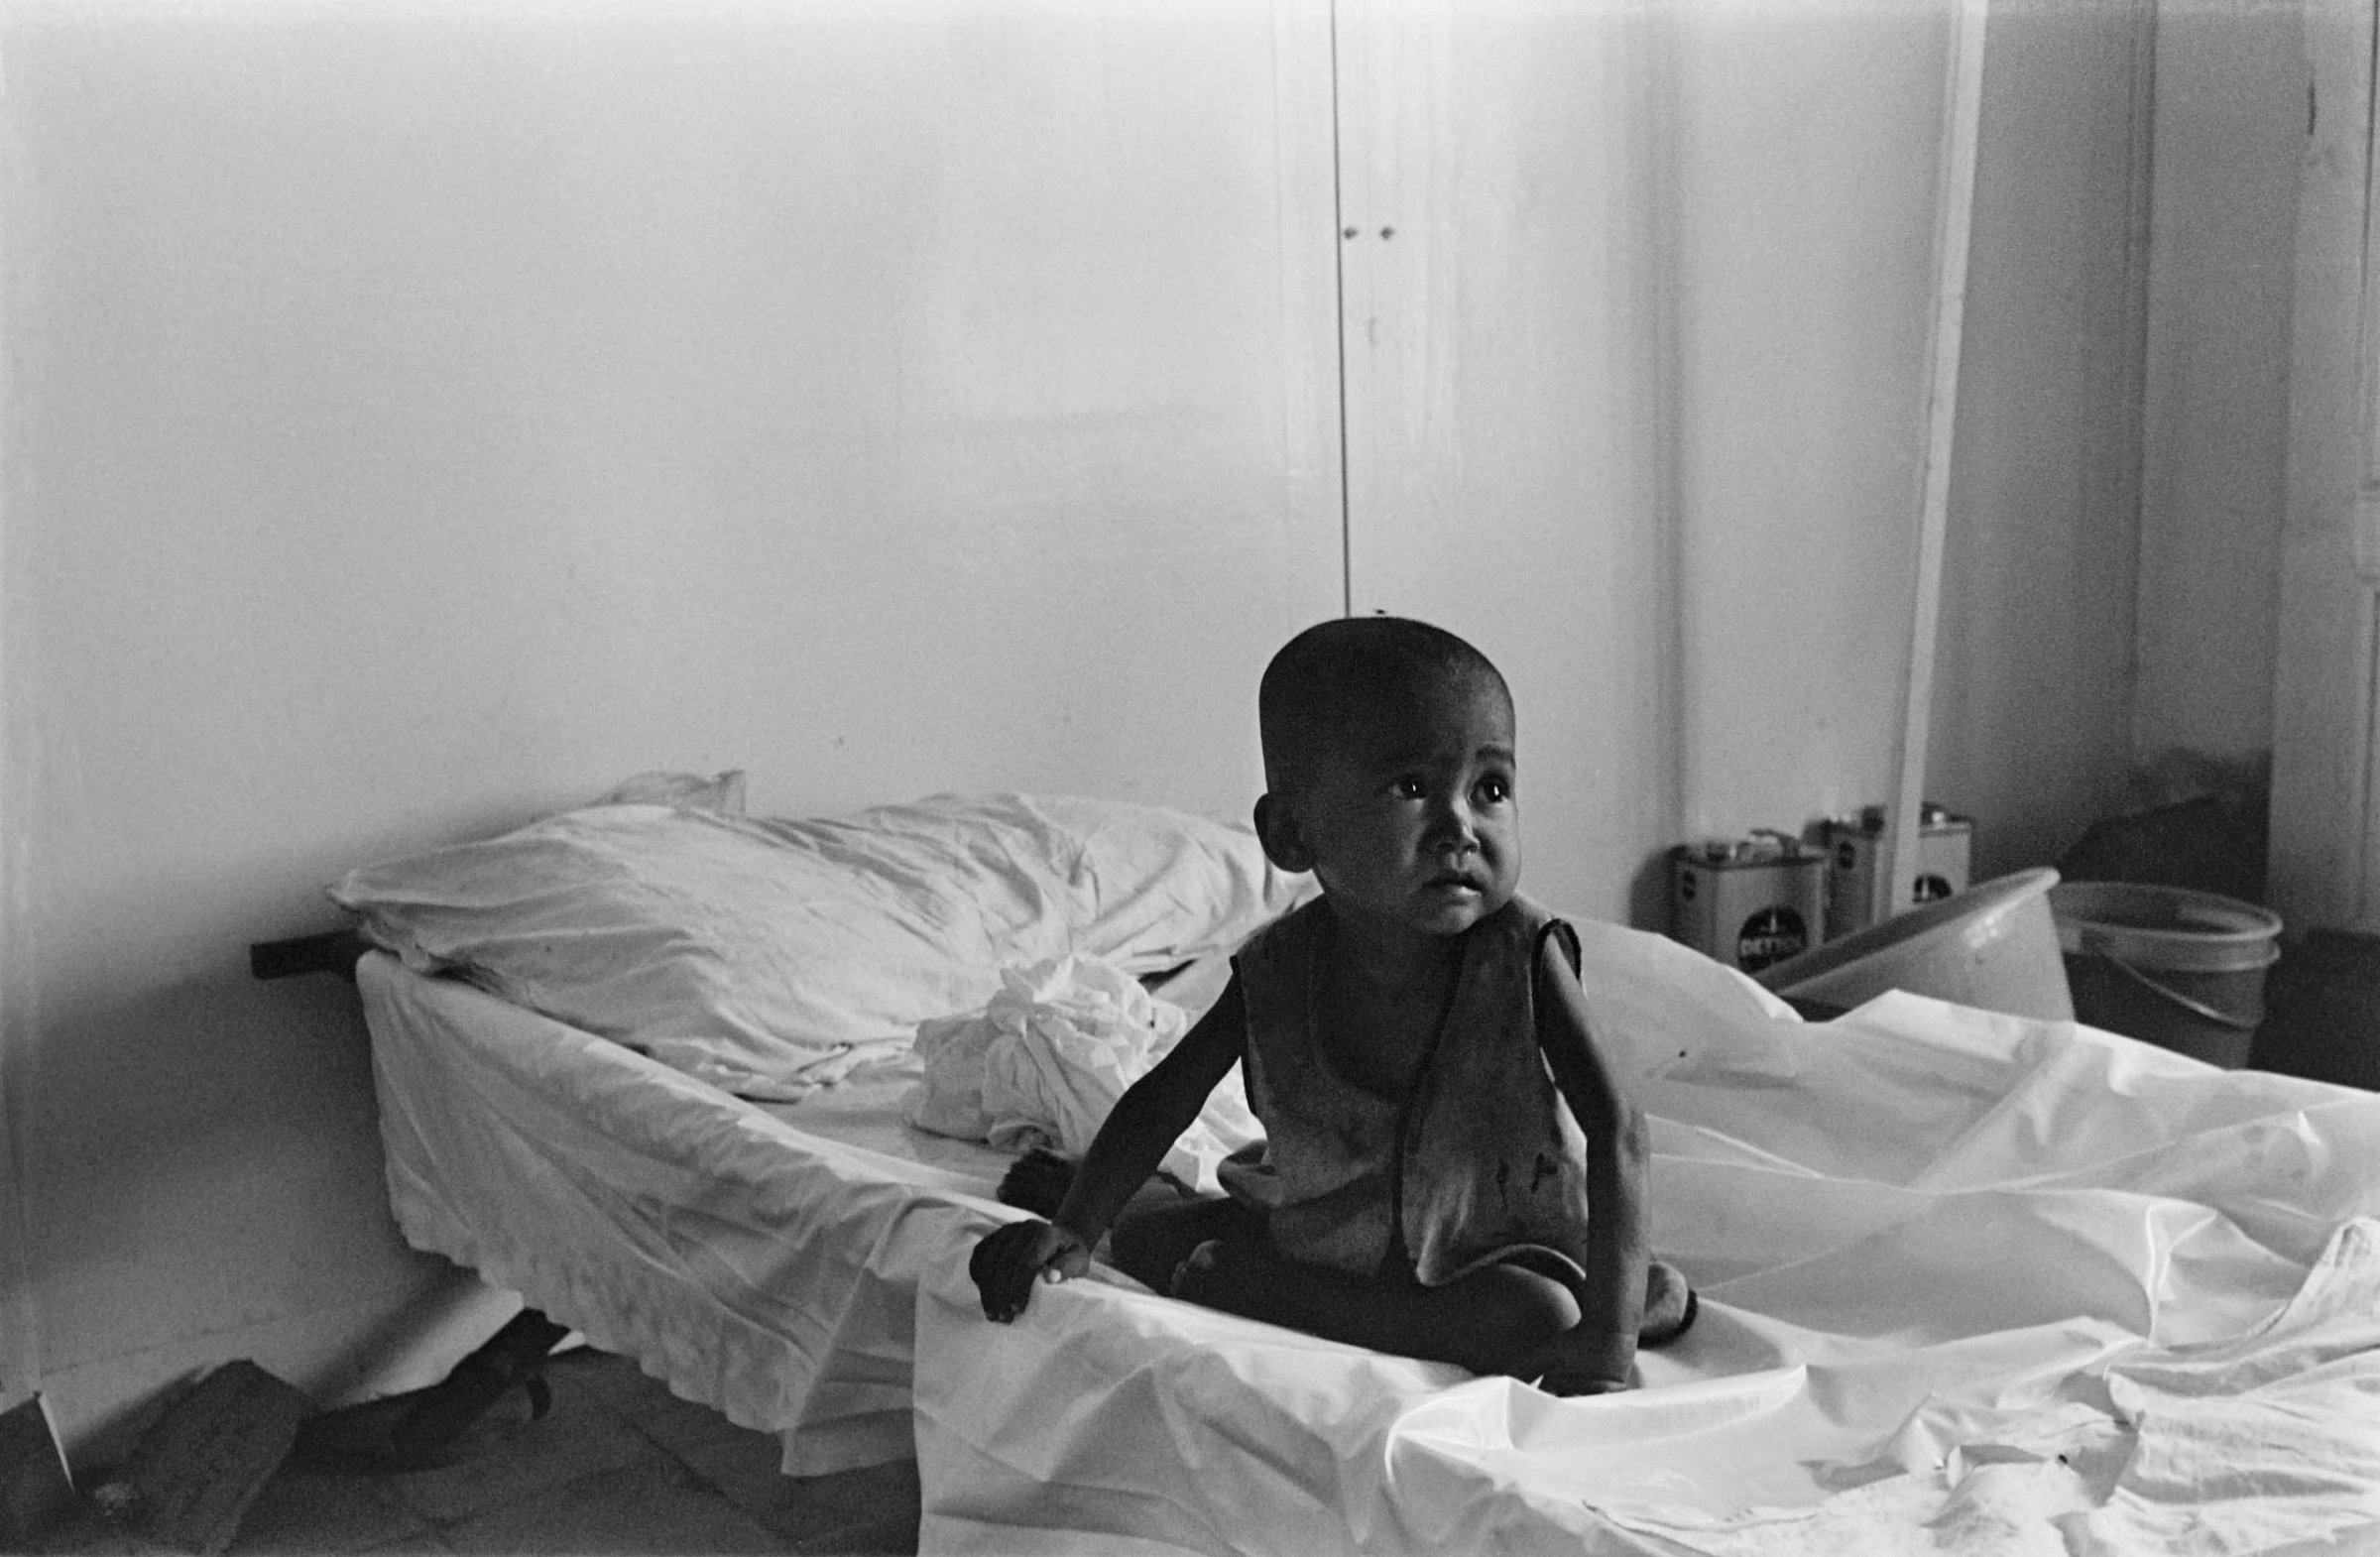 Young Cambodian child at a hospital in Phnom Penh, in March 1975.